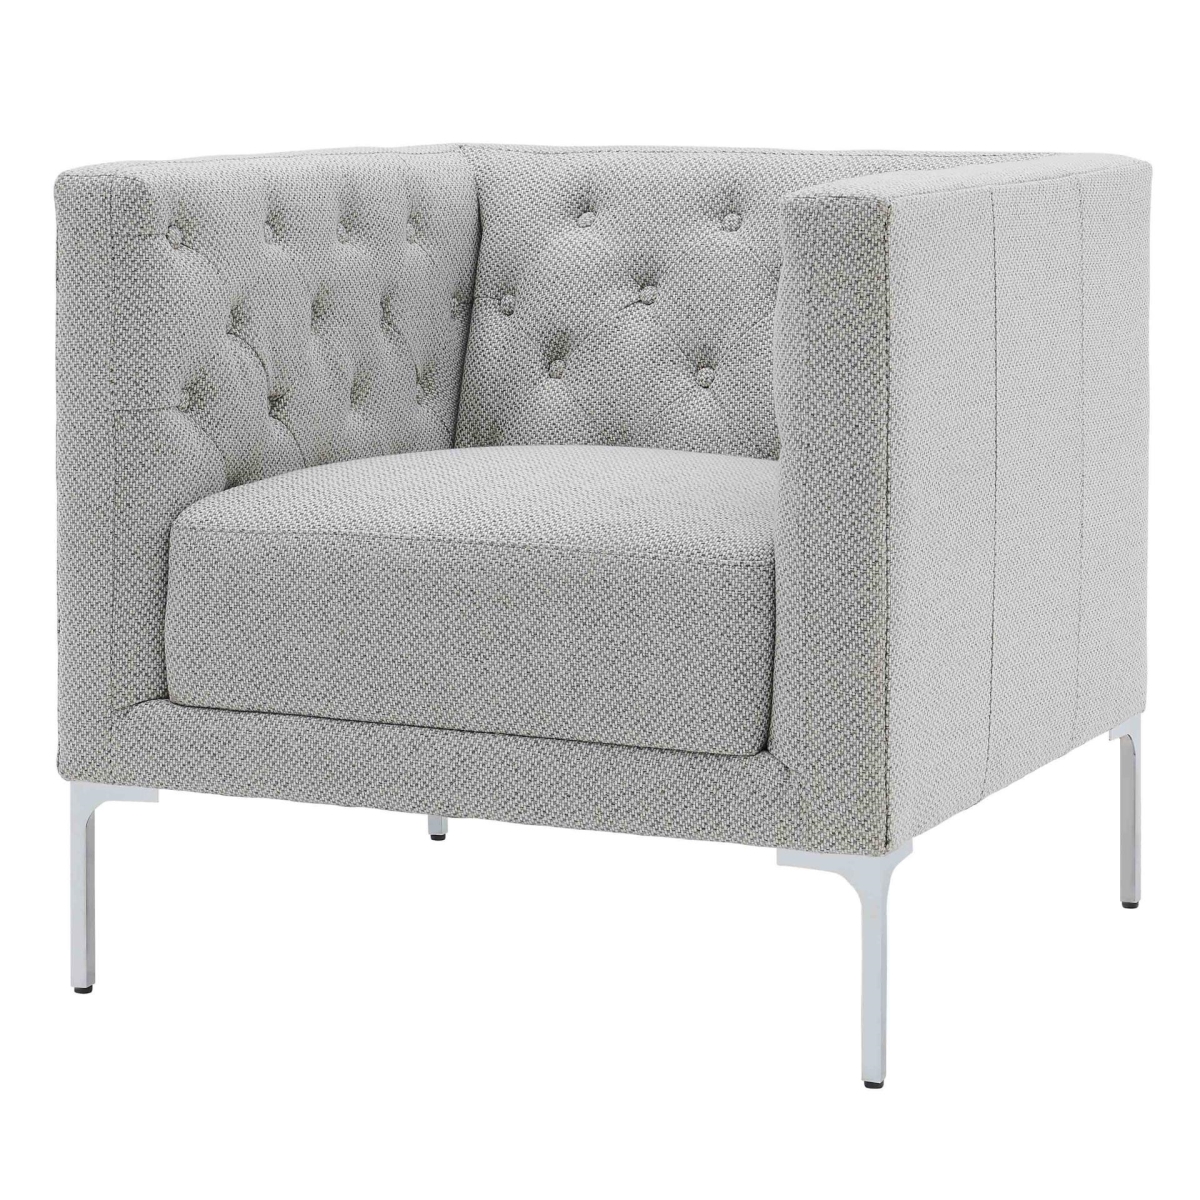 9900073-410 Johnson Kd Fabric Tufted Accent Chair, Cardiff Gray